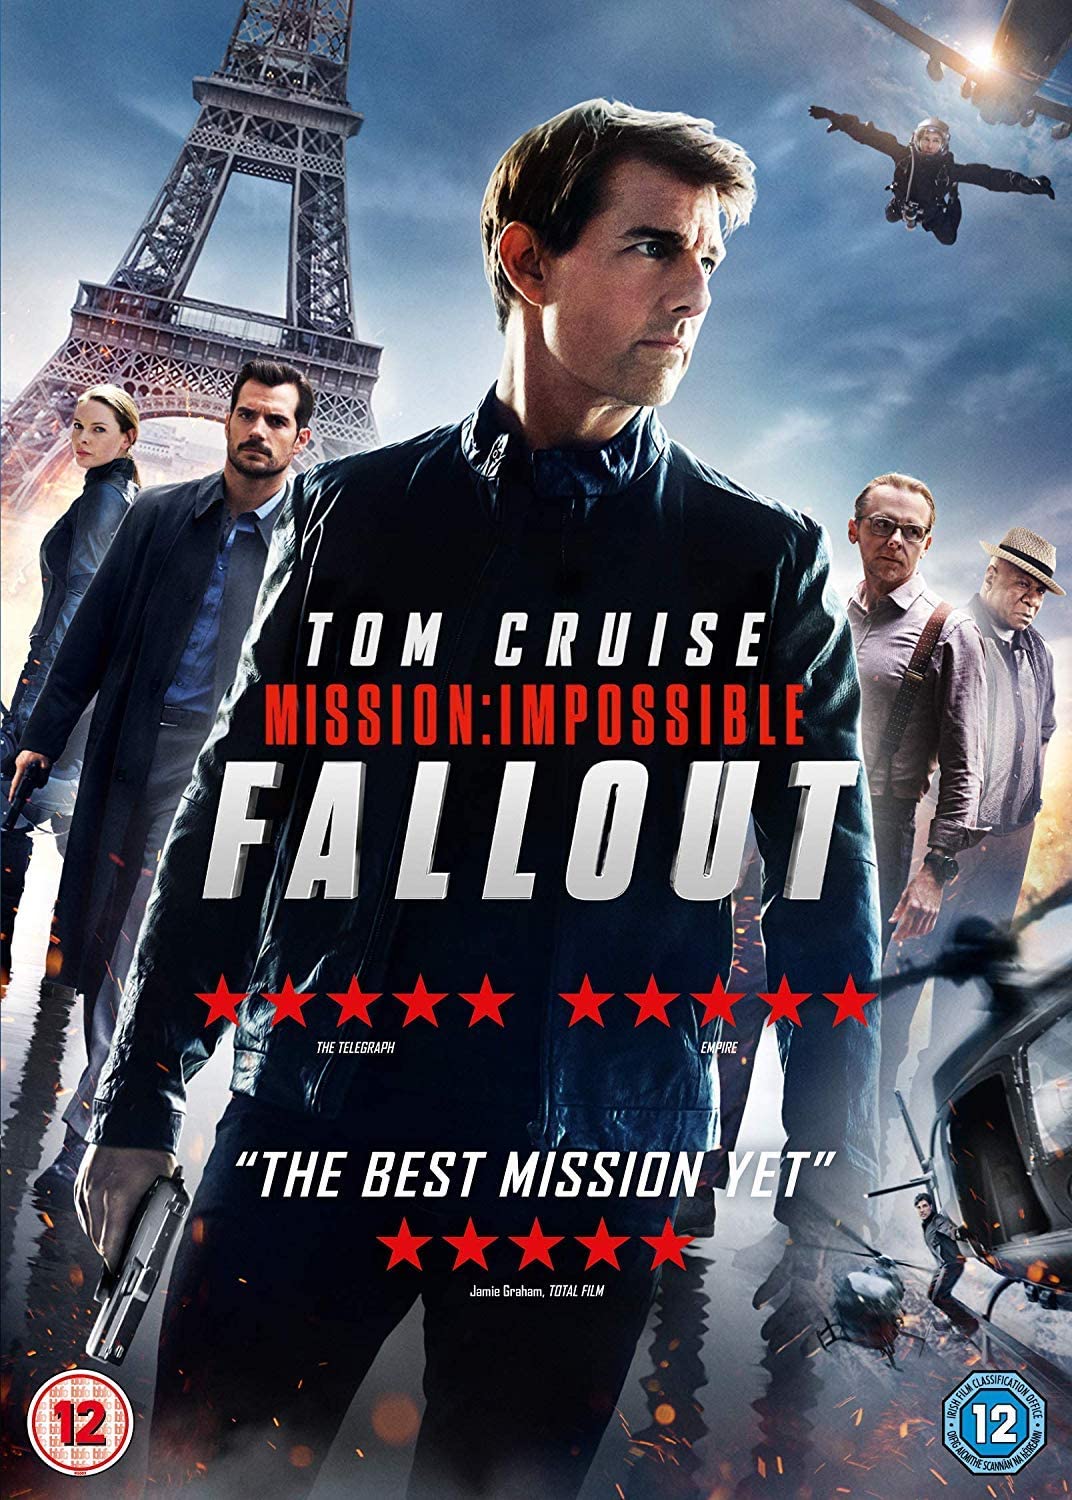 Mission: Impossible - Fallout [2018] - Action/Thriller [DVD]